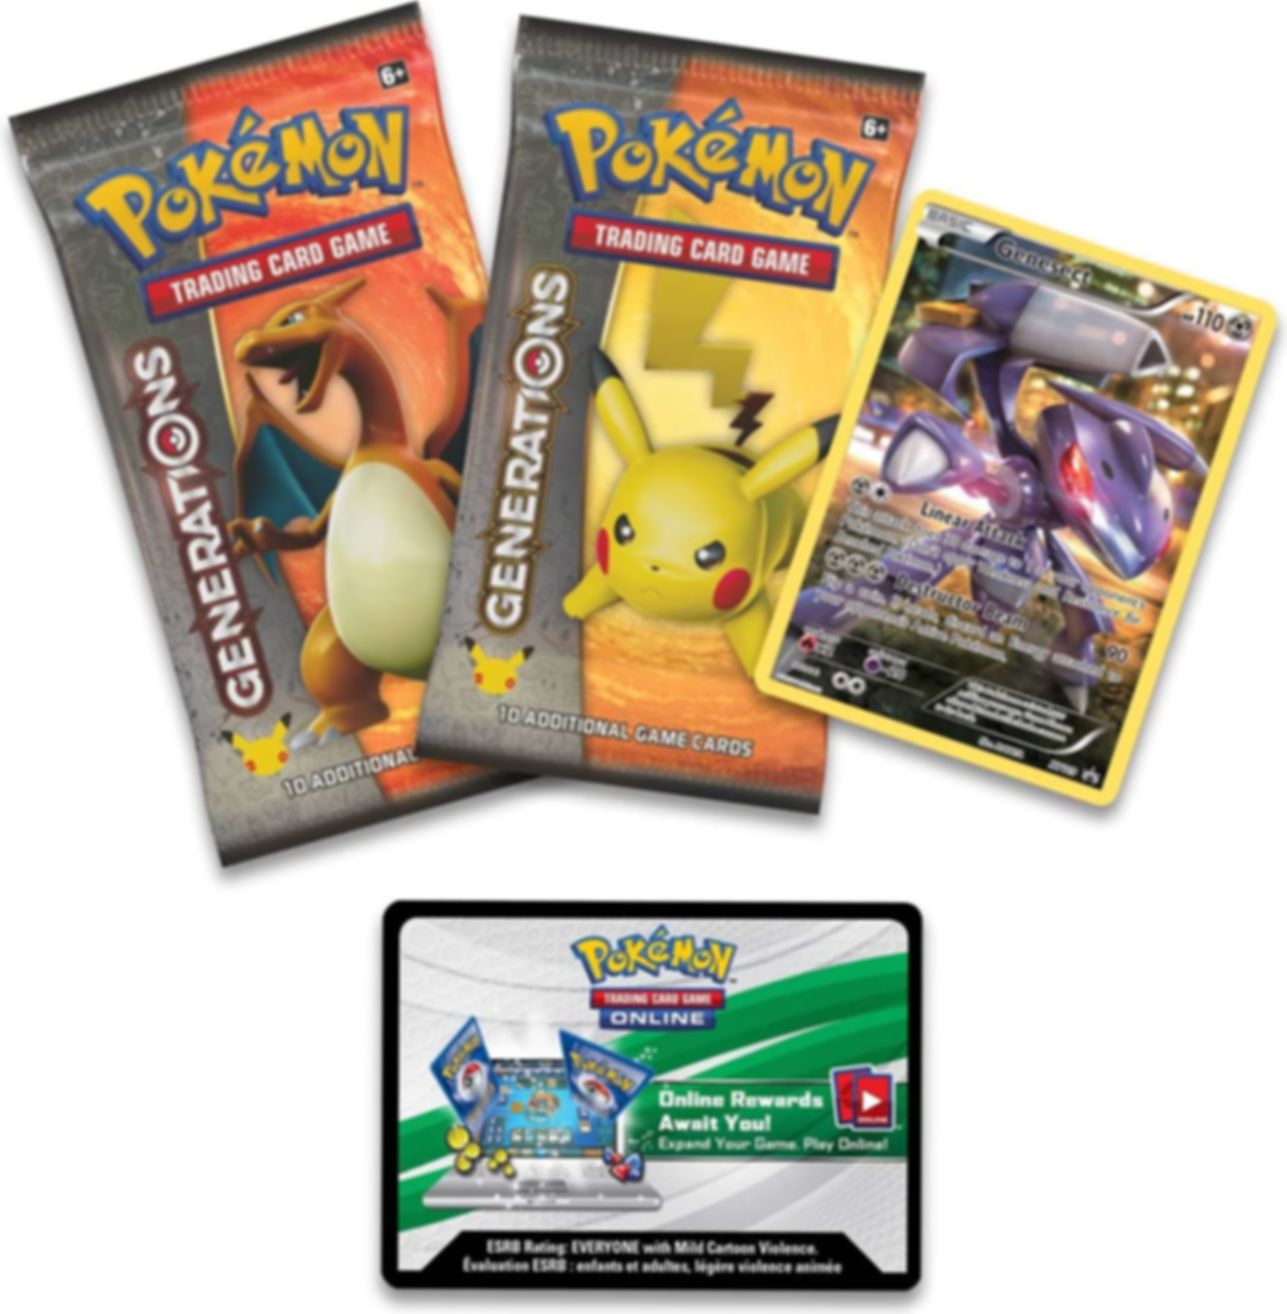 Pokémon Genesect Mythical Cards Collection Box componenti